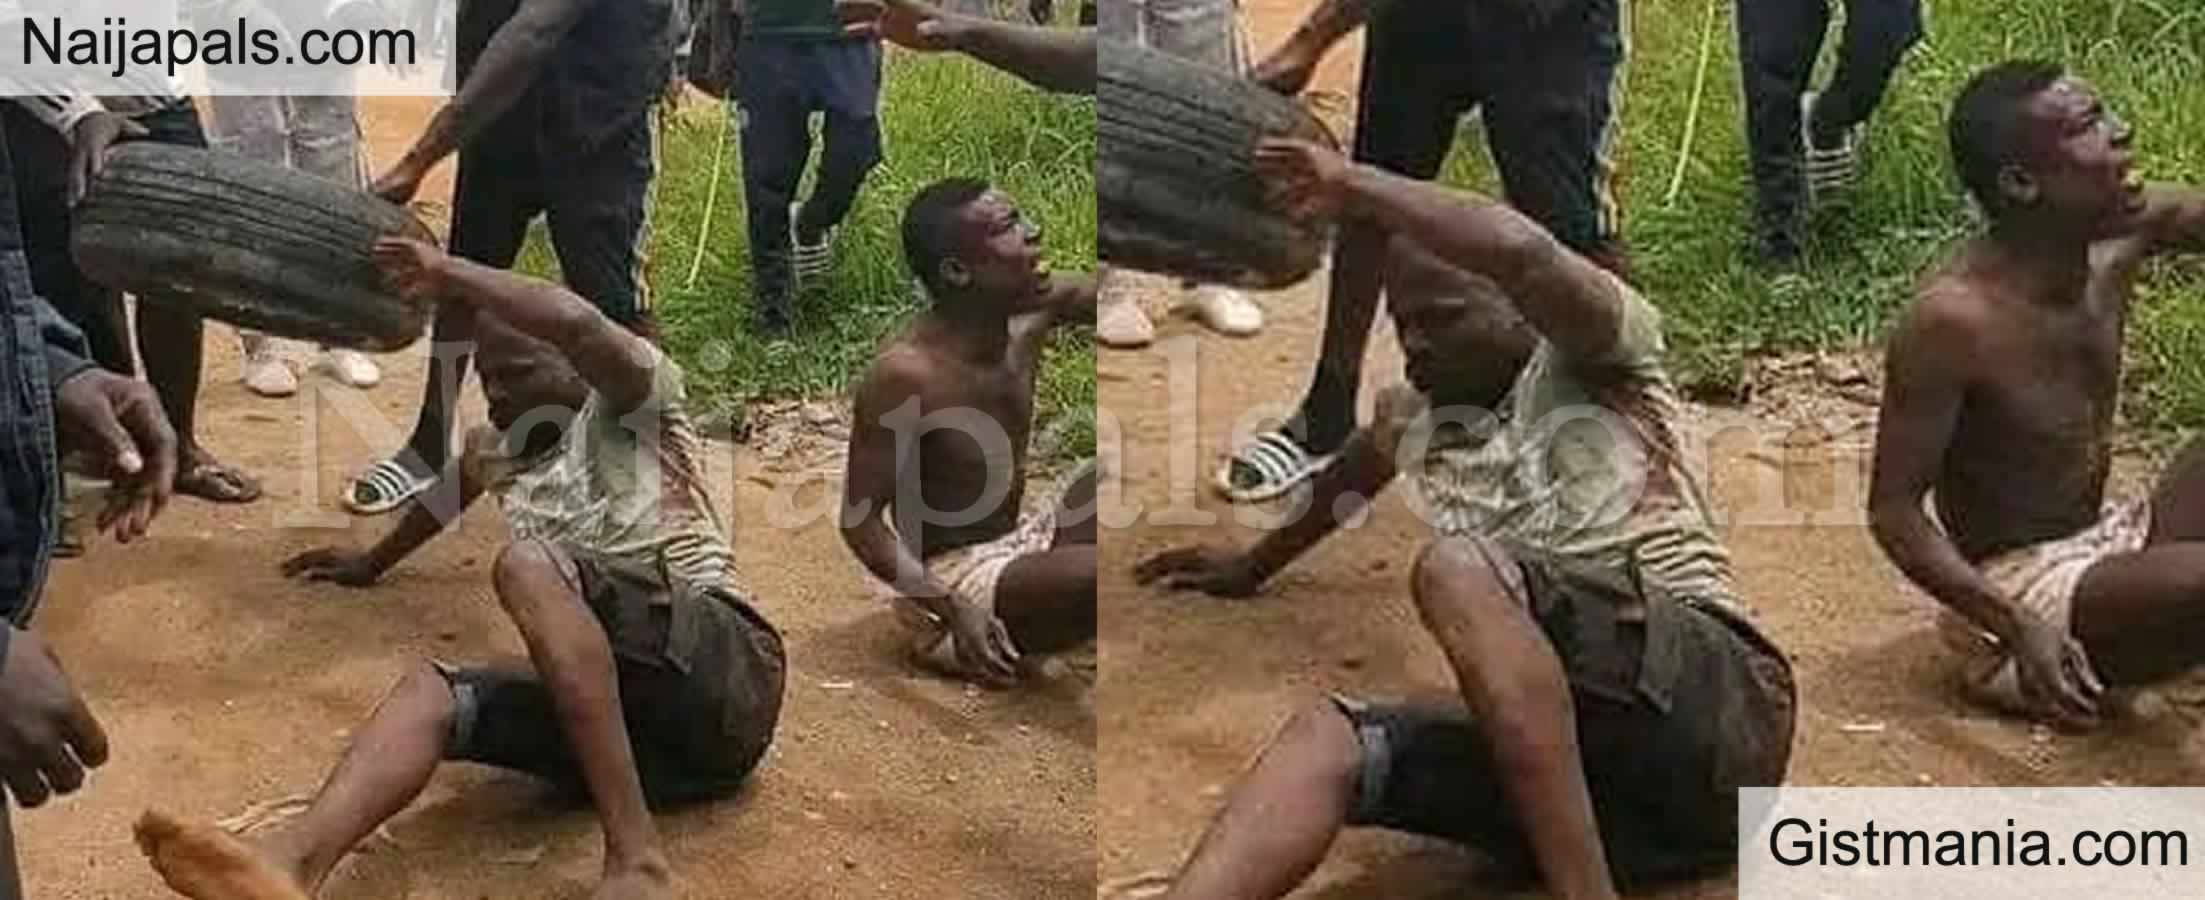 Mob Justice: Suspected Motorcycle Thieves Lynched, Burnt In Makurdi